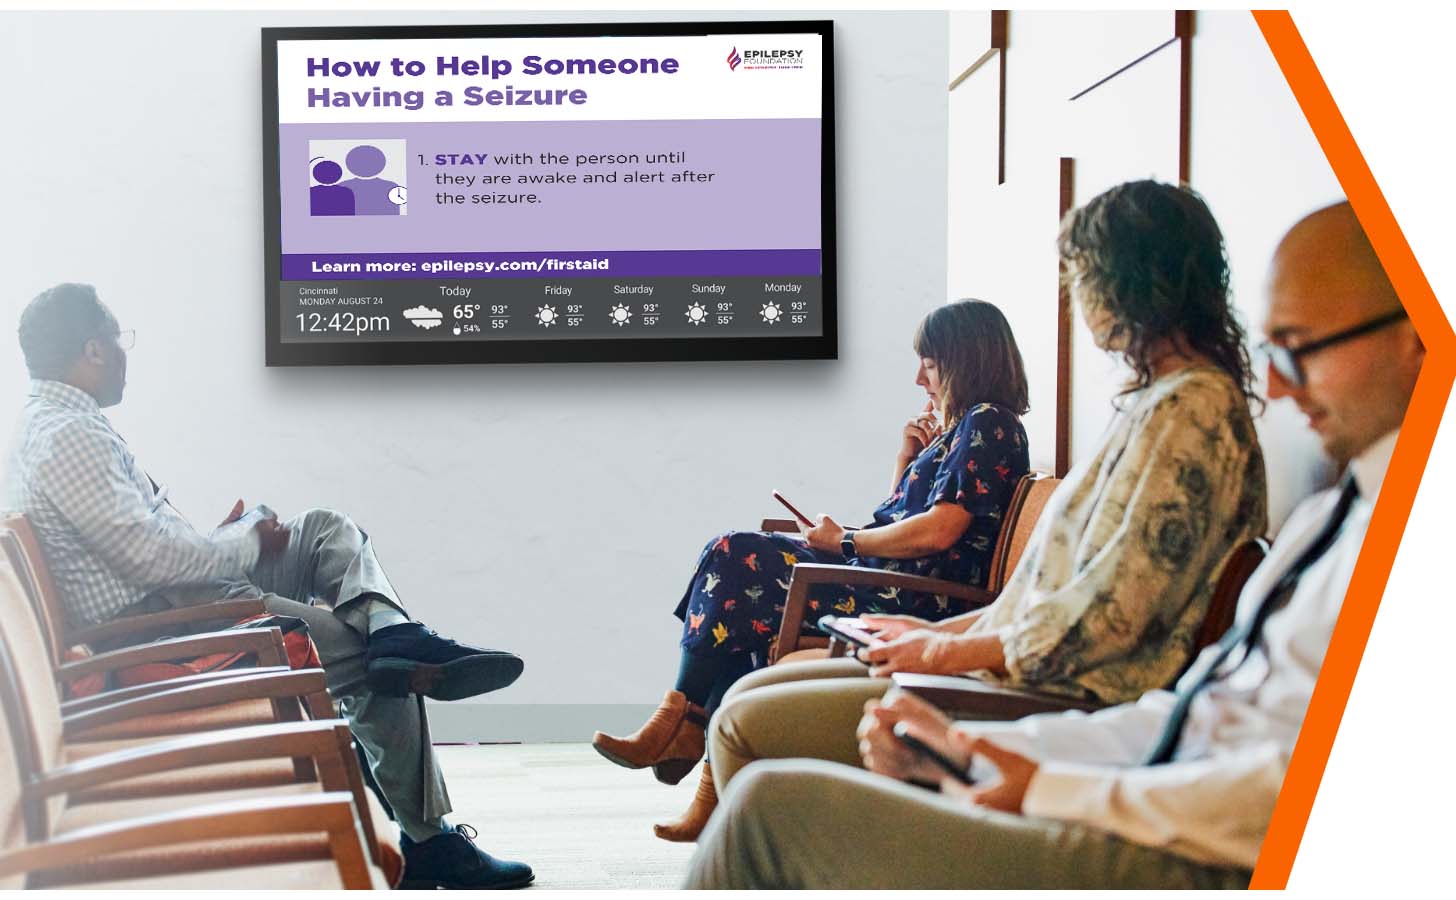 Group of patients sitting in a waiting room looking on to a screen on the wall with content about seizure safety